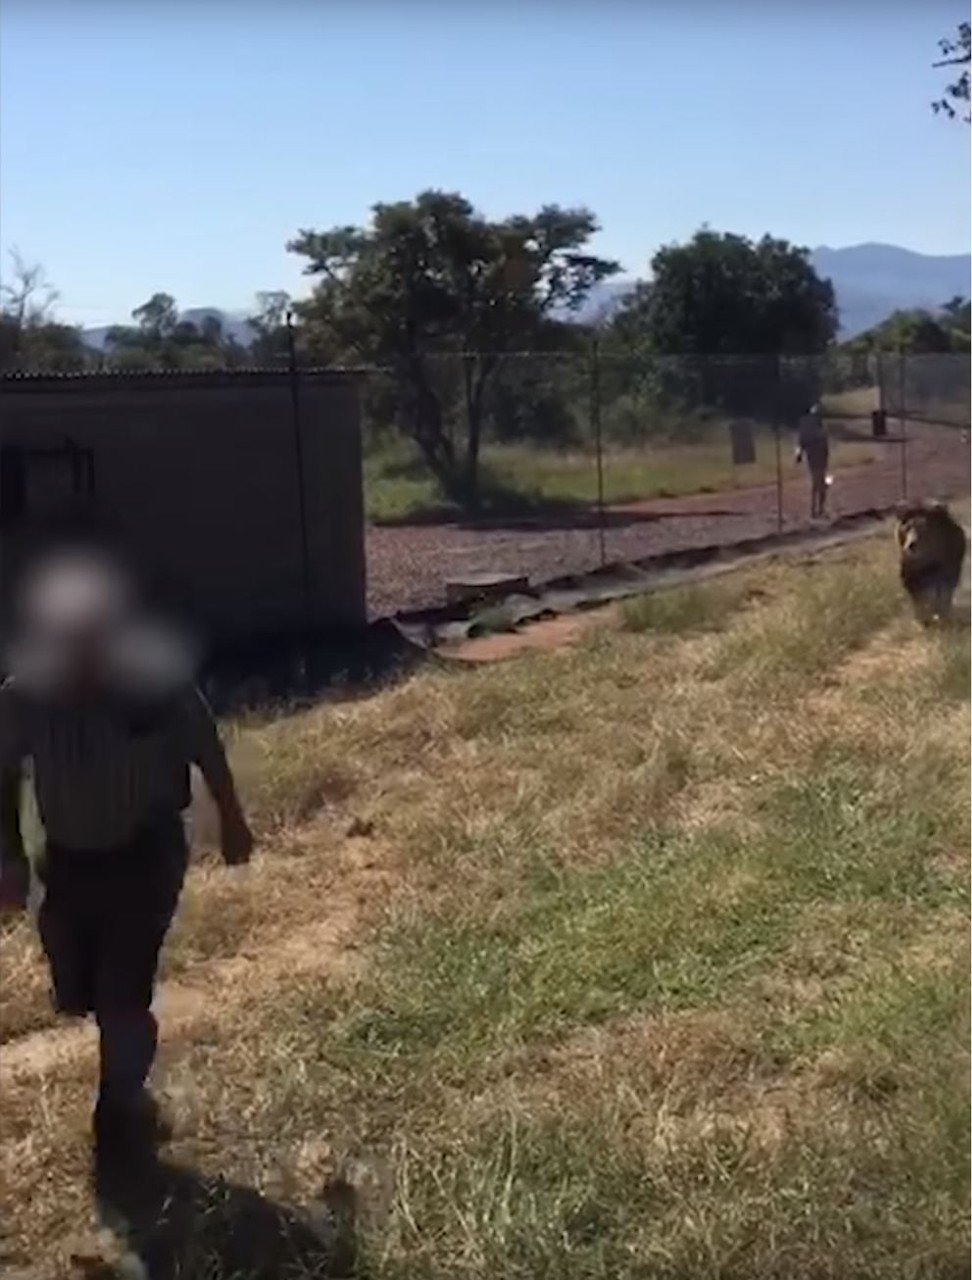 Shocking video shows man being mauled by lion after entering its